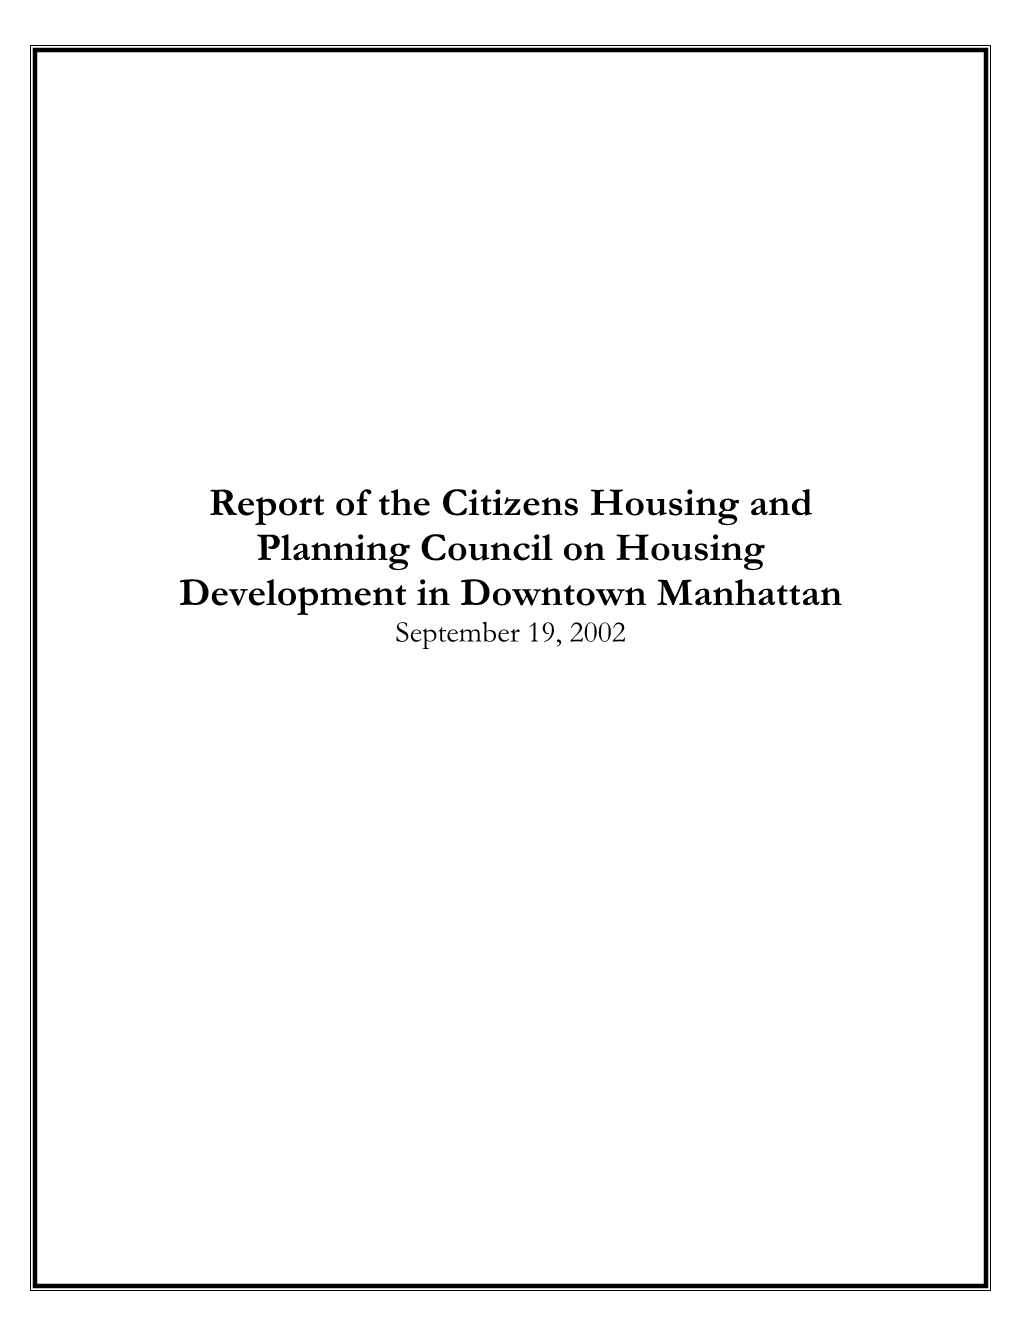 Report of the Citizens Housing and Planning Council on Housing Development in Downtown Manhattan September 19, 2002